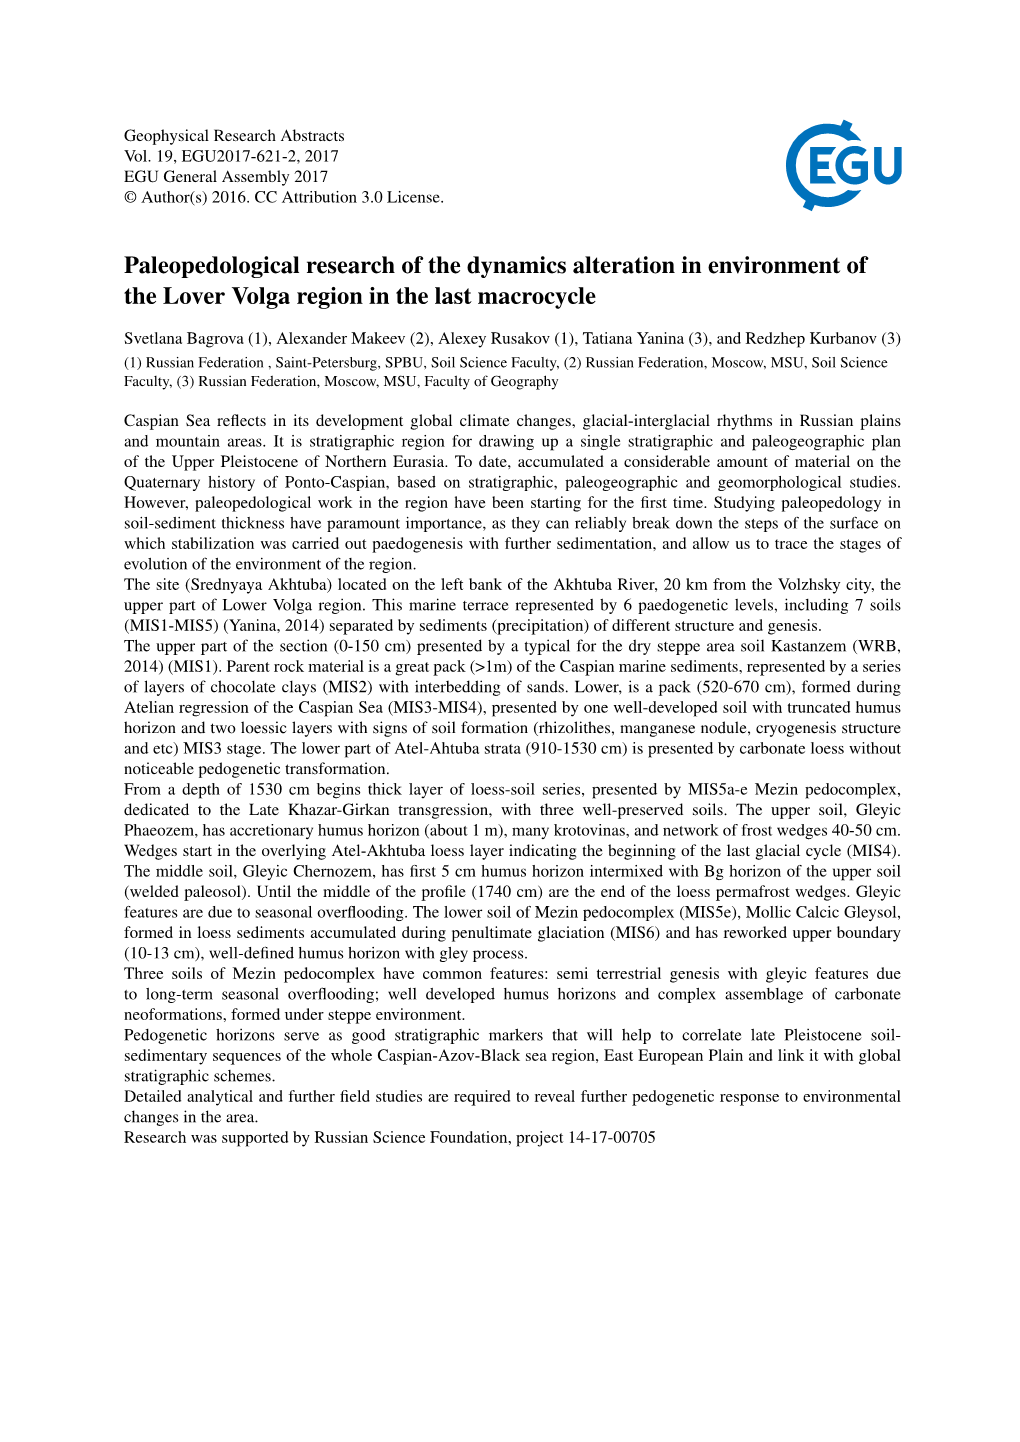 Paleopedological Research of the Dynamics Alteration in Environment of the Lover Volga Region in the Last Macrocycle